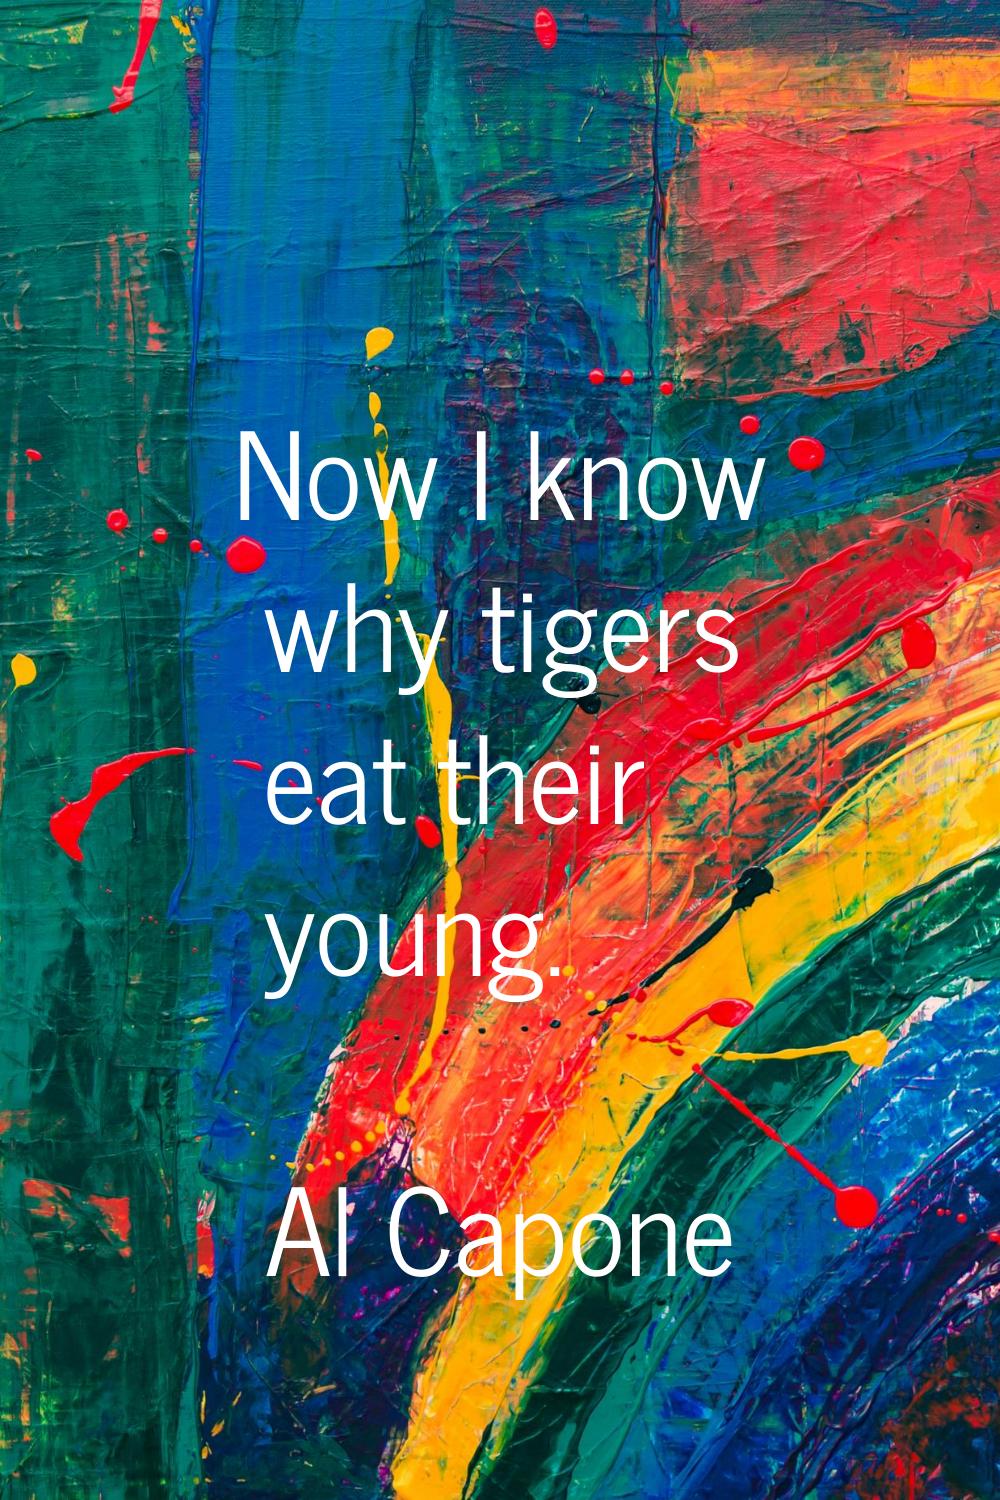 Now I know why tigers eat their young.